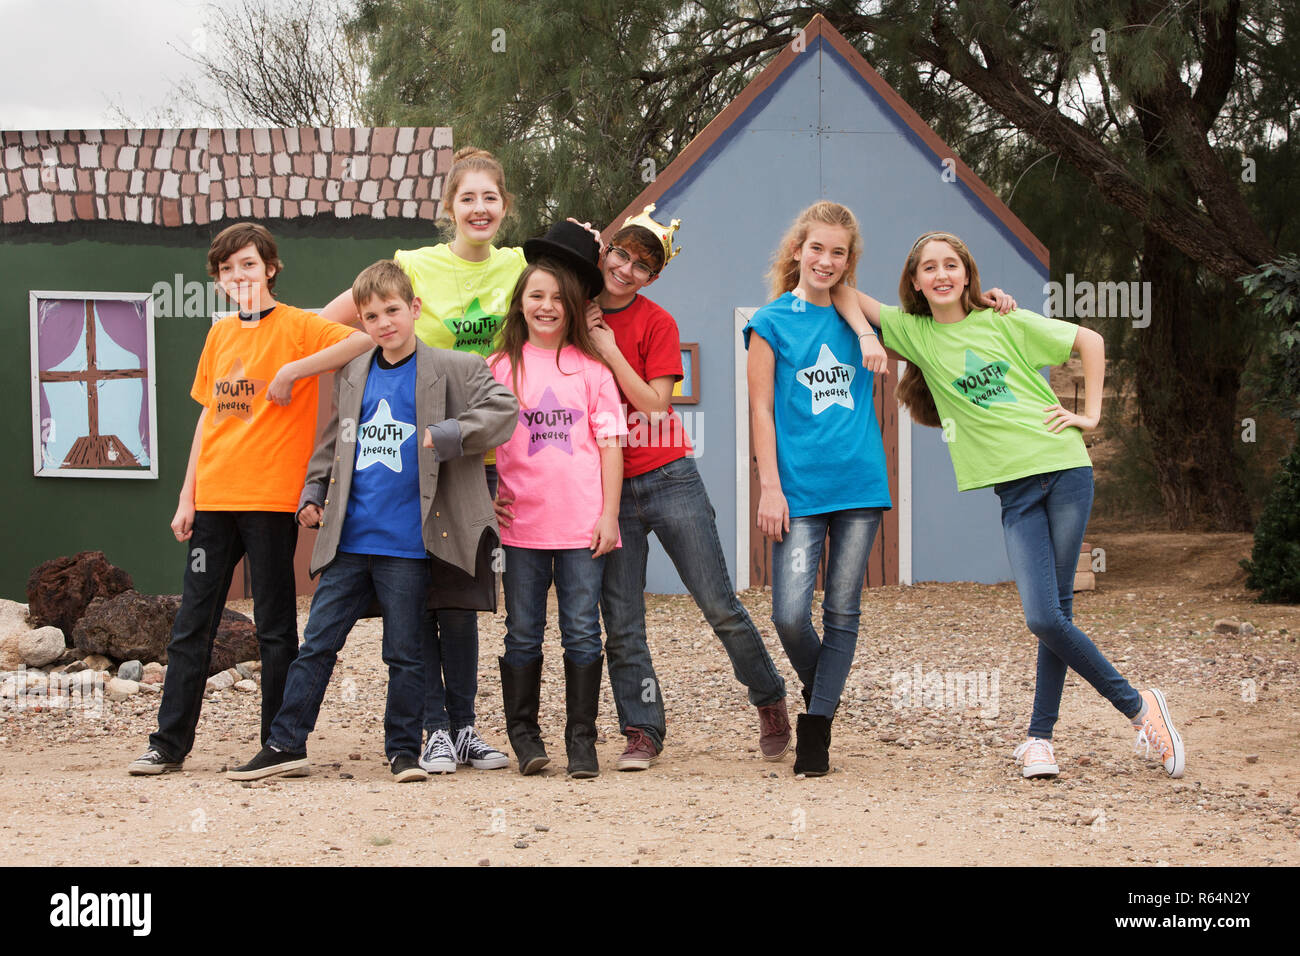 Theater camp children pose together Stock Photo